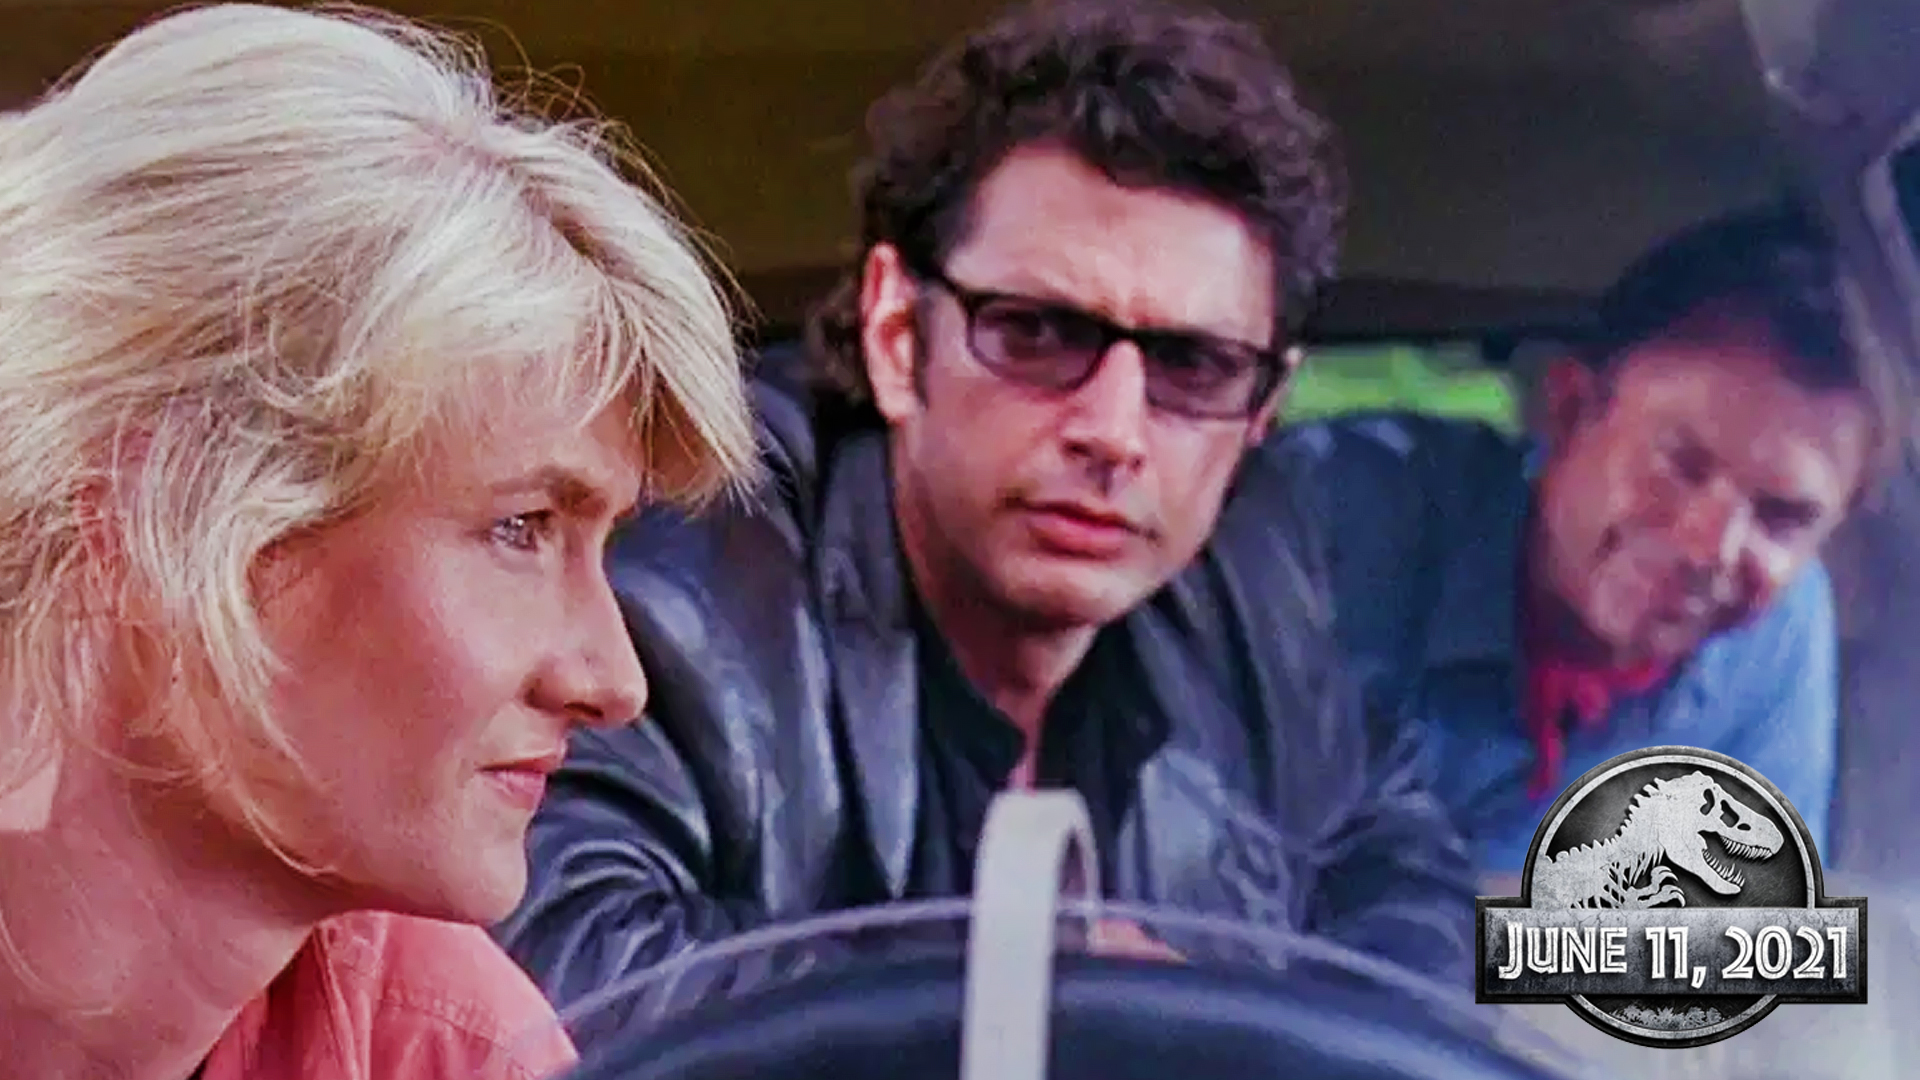 Jurassic World 3 casting news Sam Neill, Jeff Goldblum and Laura Dern Reprising Their Iconic Roles For The Movie alan grant ian malcolm ellie satler everything we know so far